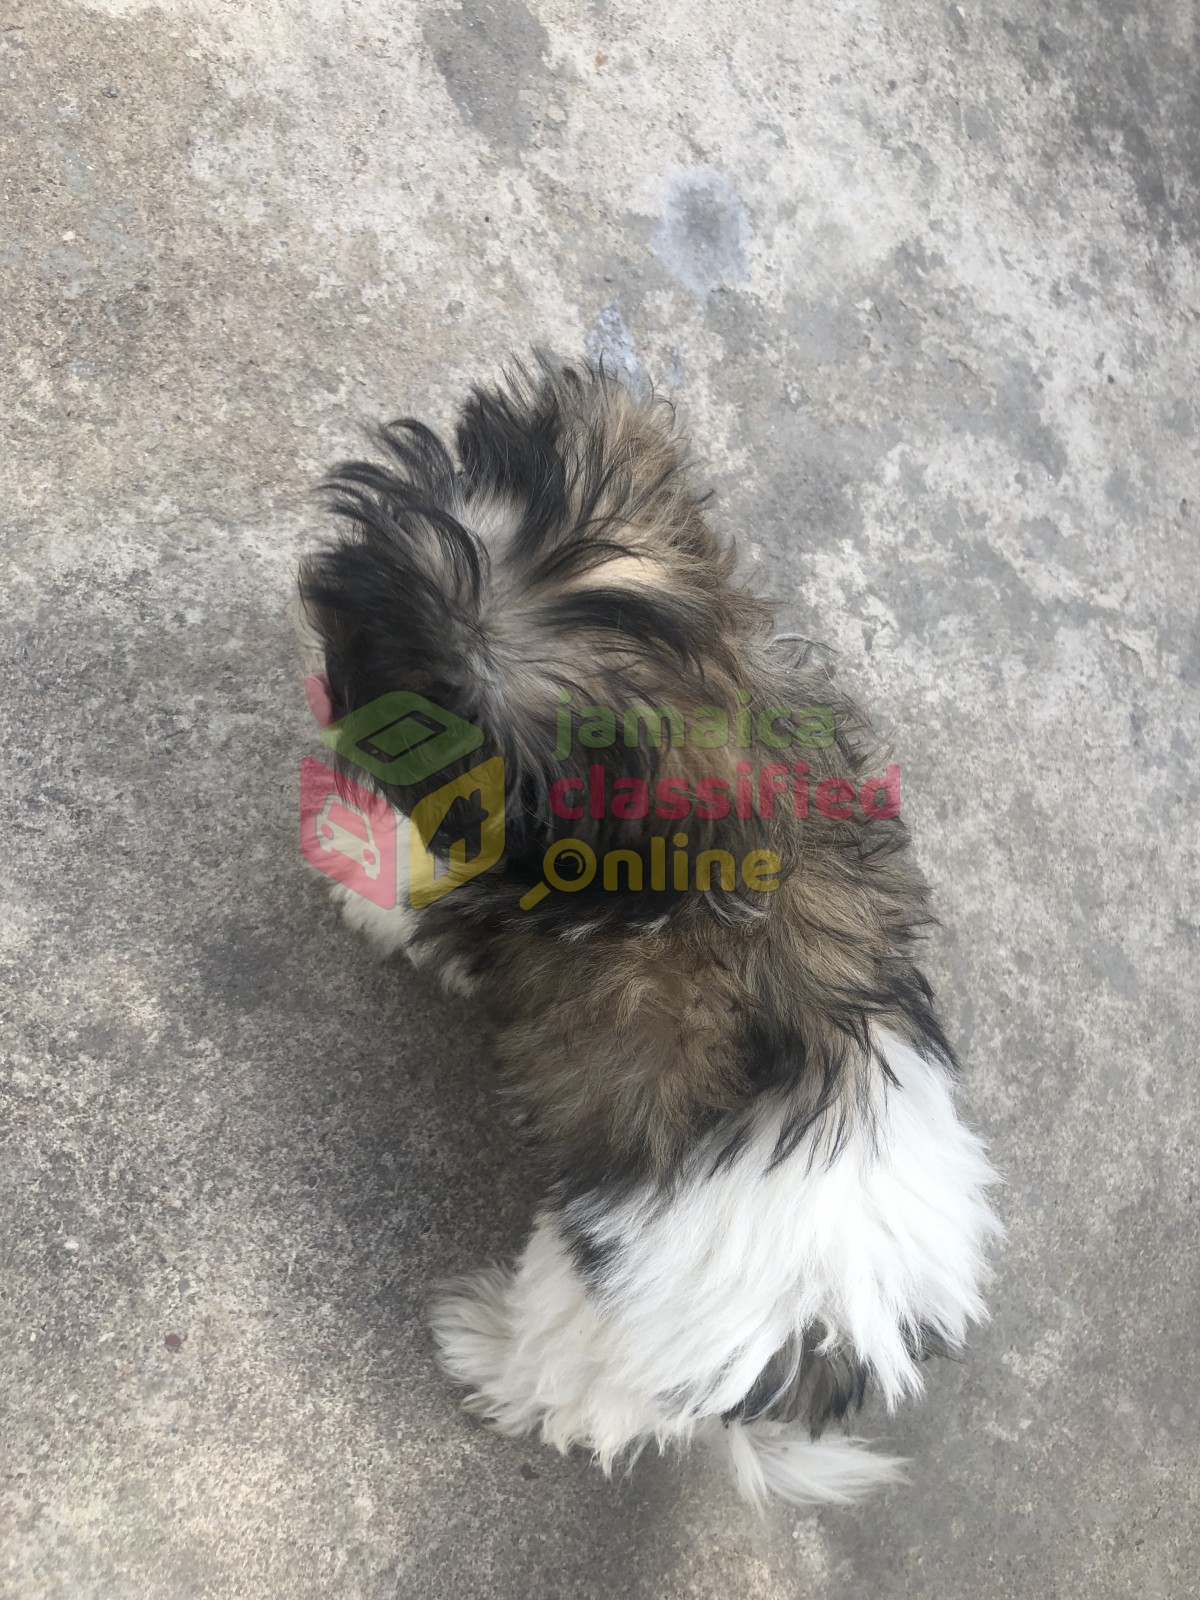 77+ Shih Tzu And Poodle Puppies For Sale